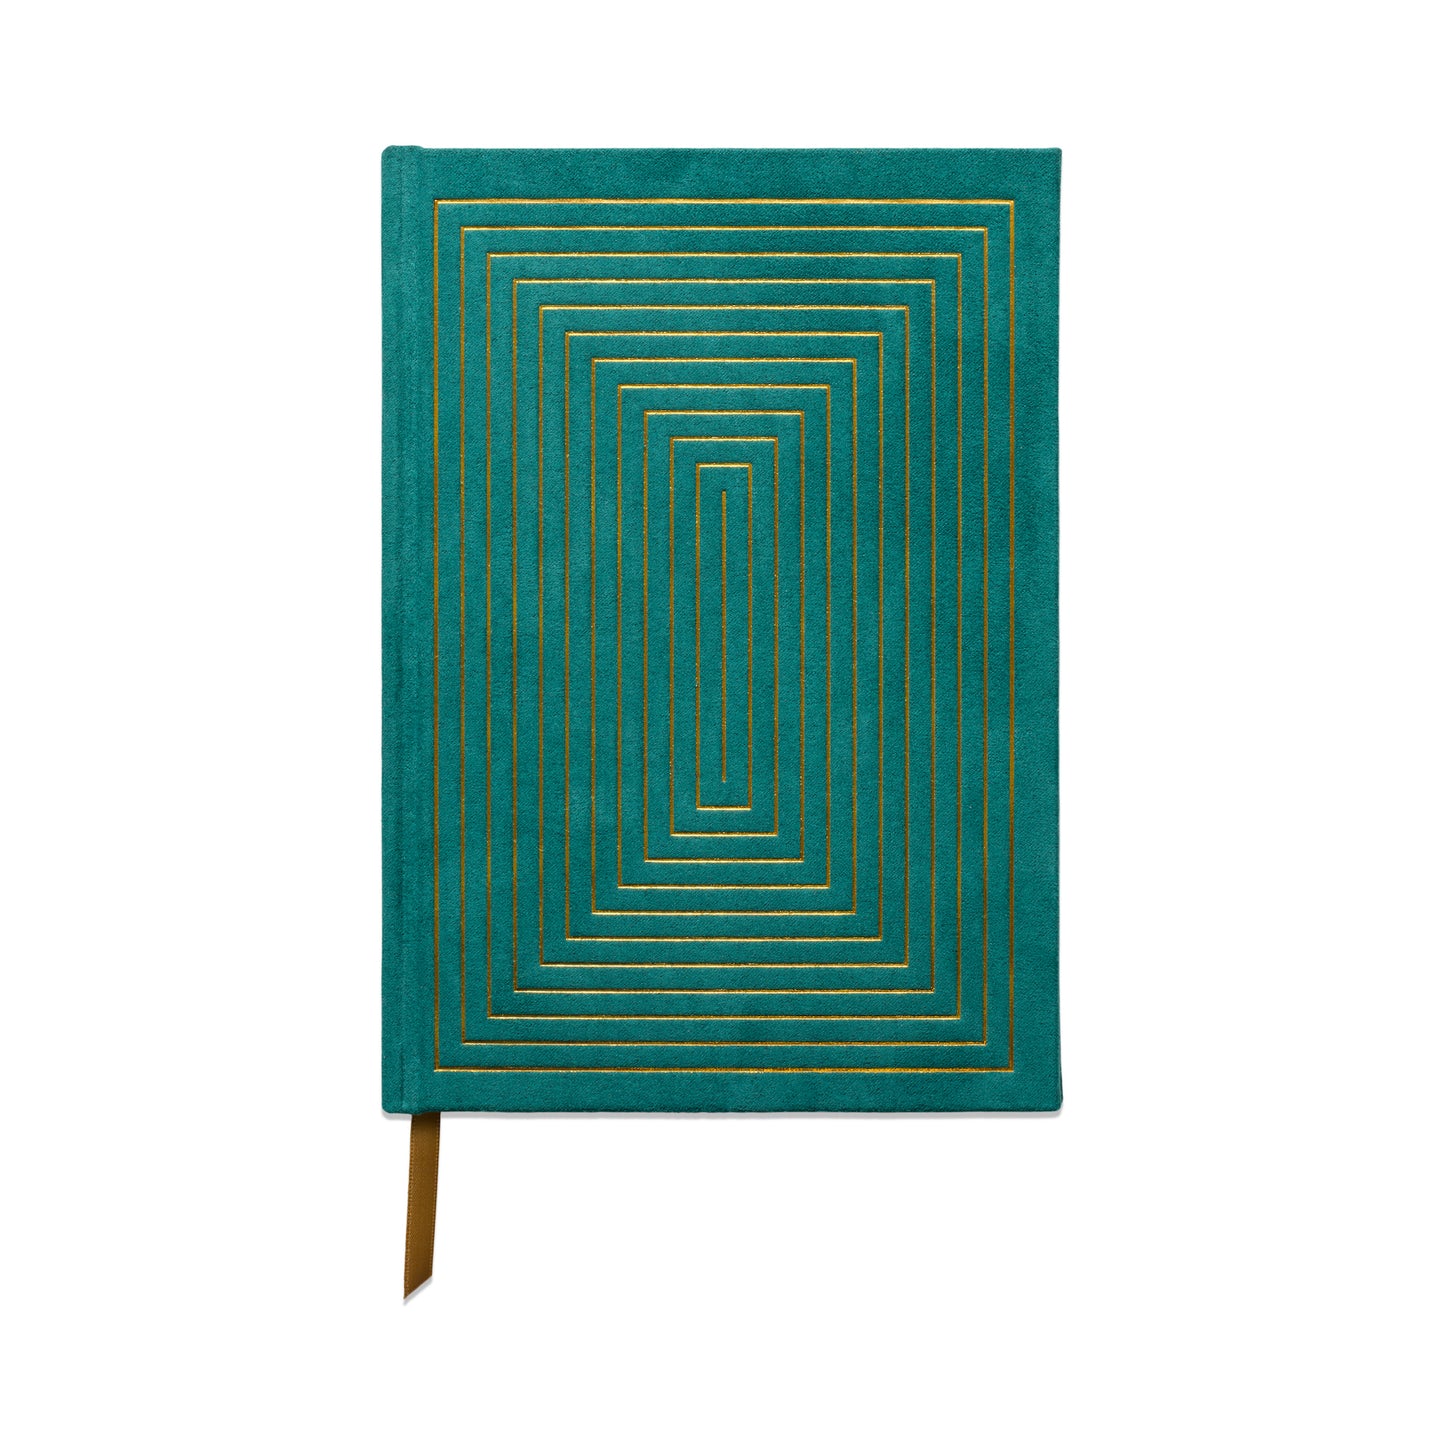 Hard Cover Suede Cloth Journal With Pocket - Linear Boxes green